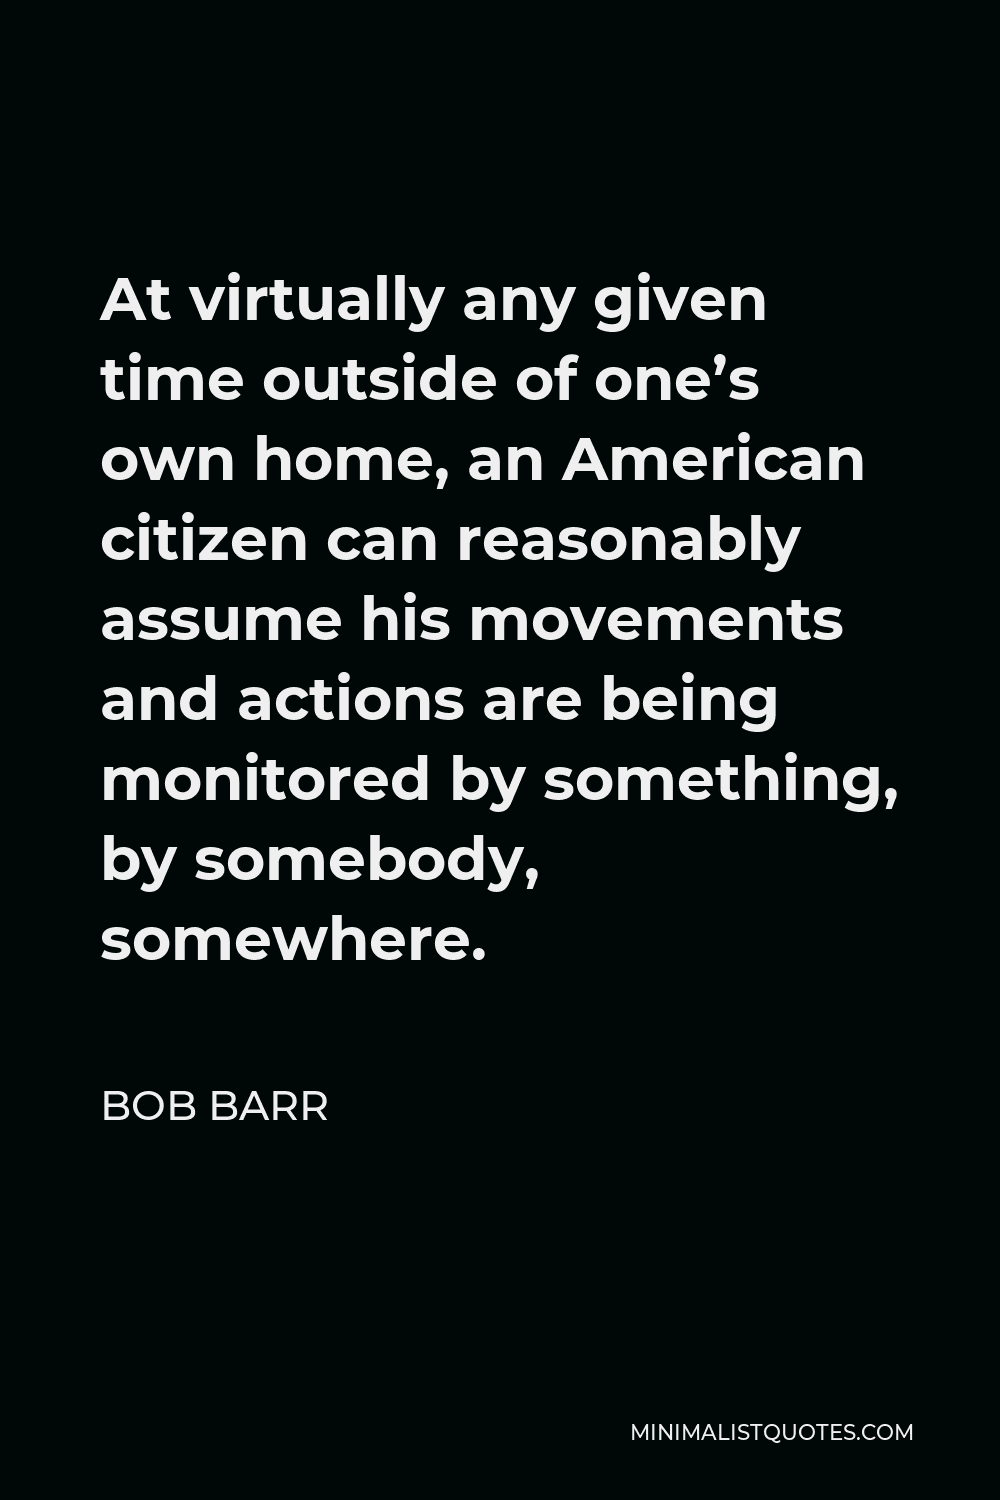 Bob Barr Quote - At virtually any given time outside of one’s own home, an American citizen can reasonably assume his movements and actions are being monitored by something, by somebody, somewhere.